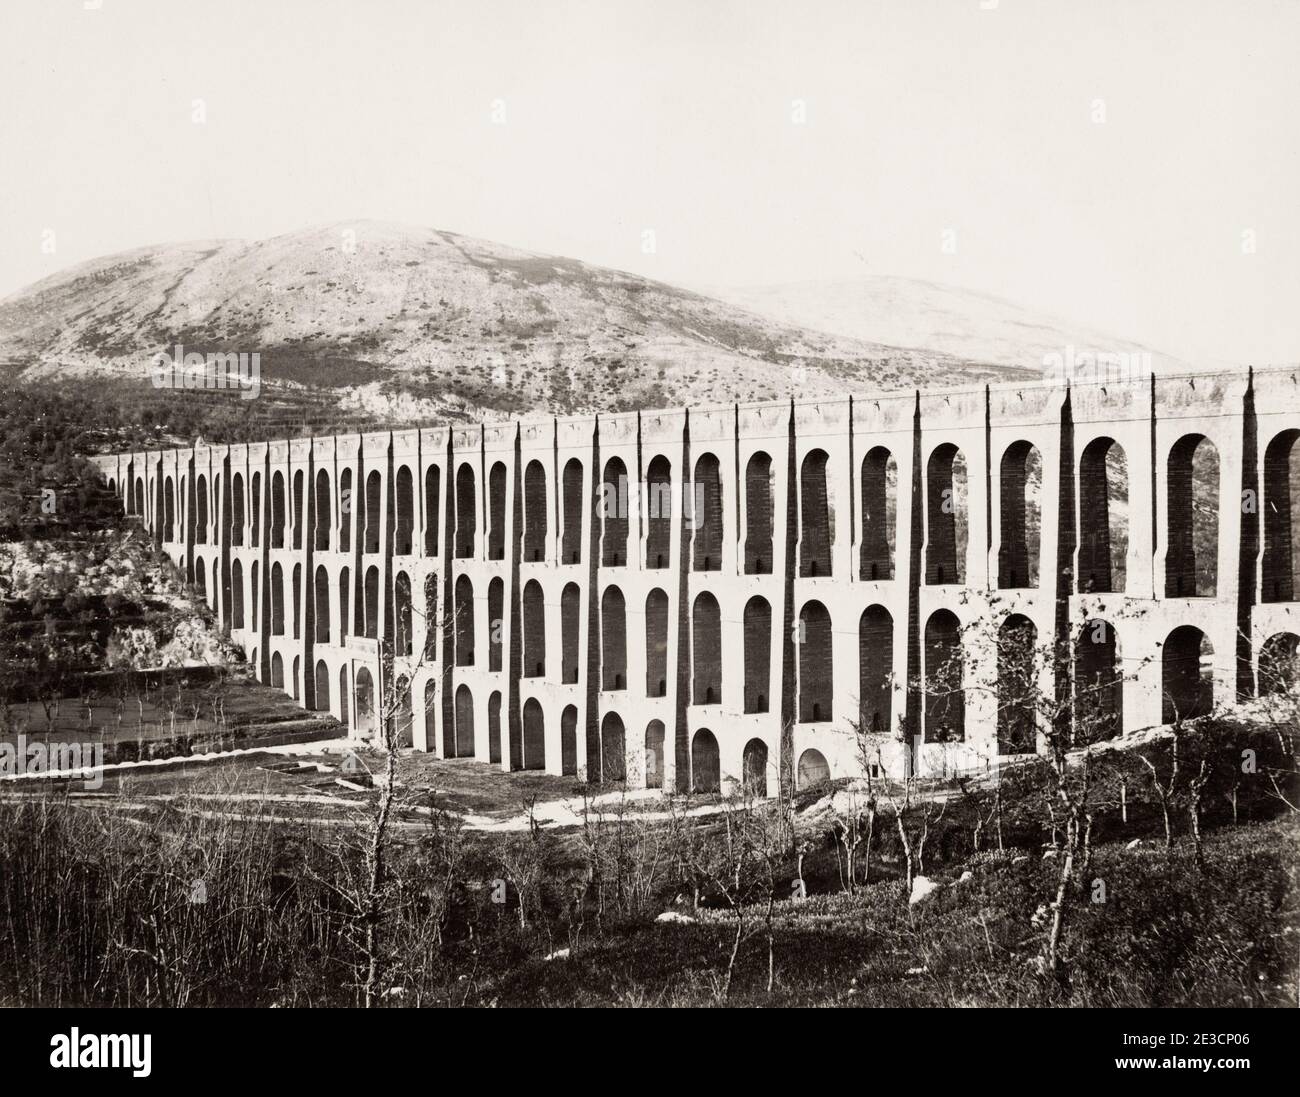 Vintage 19th century photograph: The Aqueduct of Vanvitelli or Caroline Aqueduct is an aqueduct built to supply the Reggia di Caserta and the San Leucio complex, supplied by water arising at the foot of Taburno, from the springs of the Fizzo, in the territory of Bucciano, which it carries along a winding 38 km route, Italy. Stock Photo